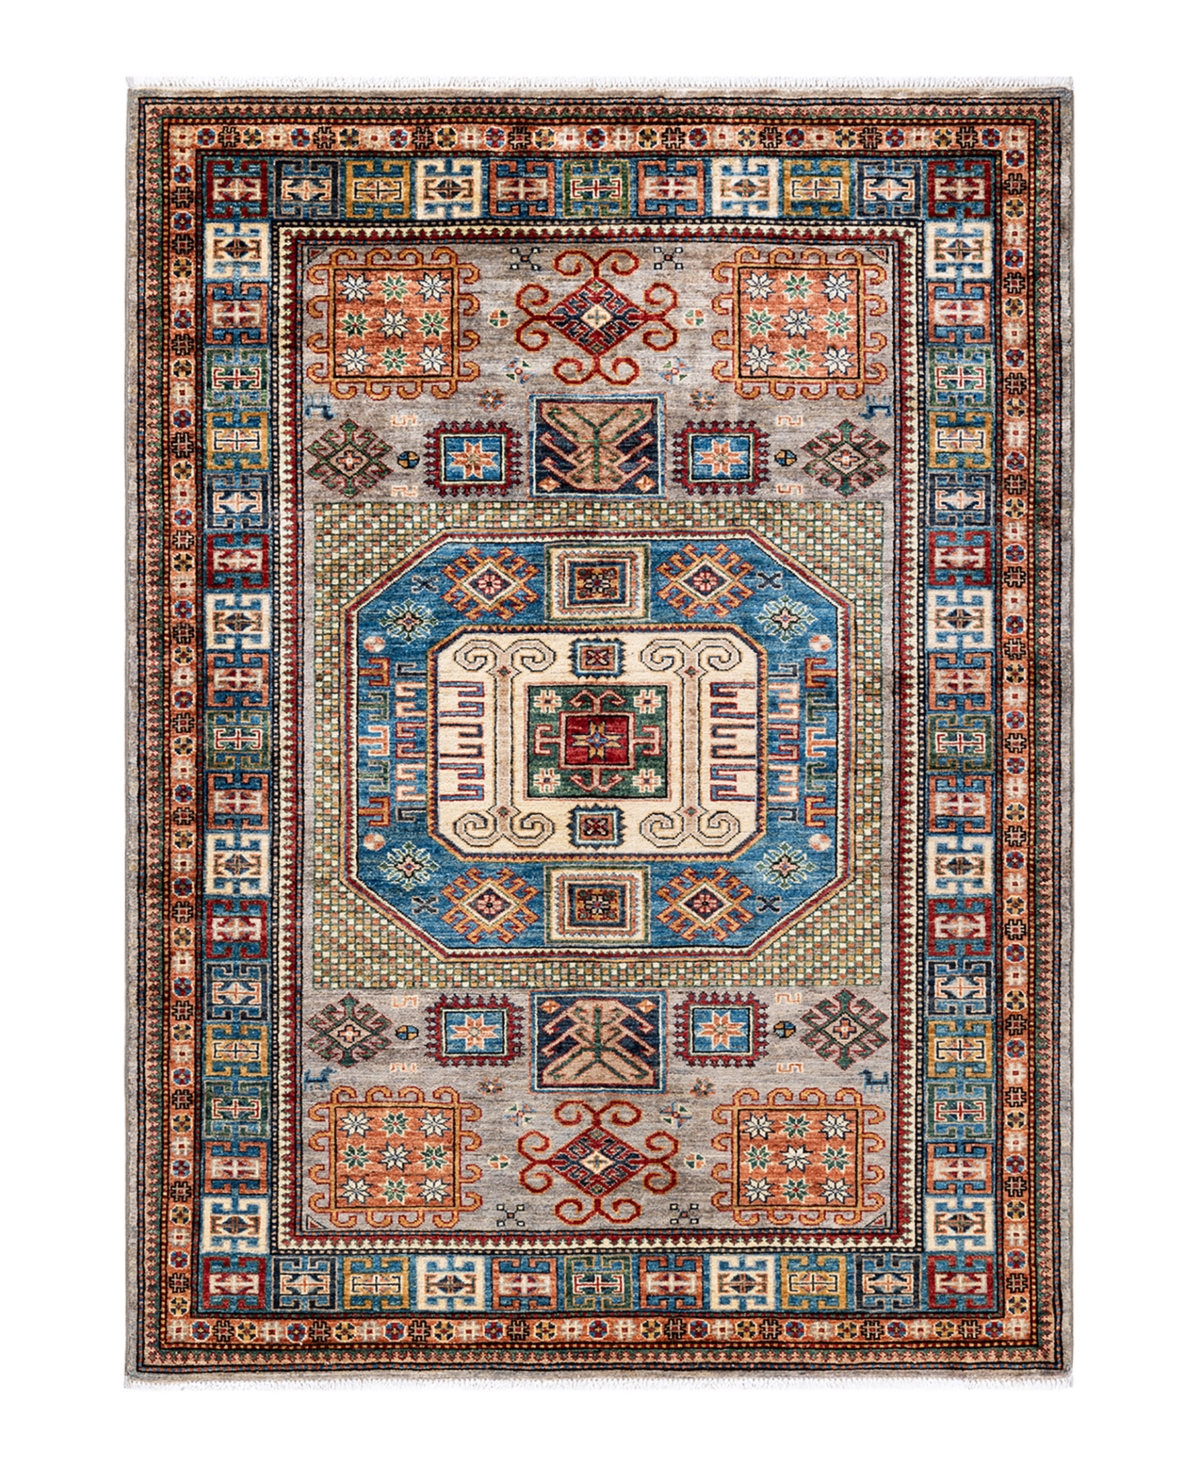 Adorn Hand Woven Rugs Serapi M1973 5' X 6'9" Area Rug In Beige